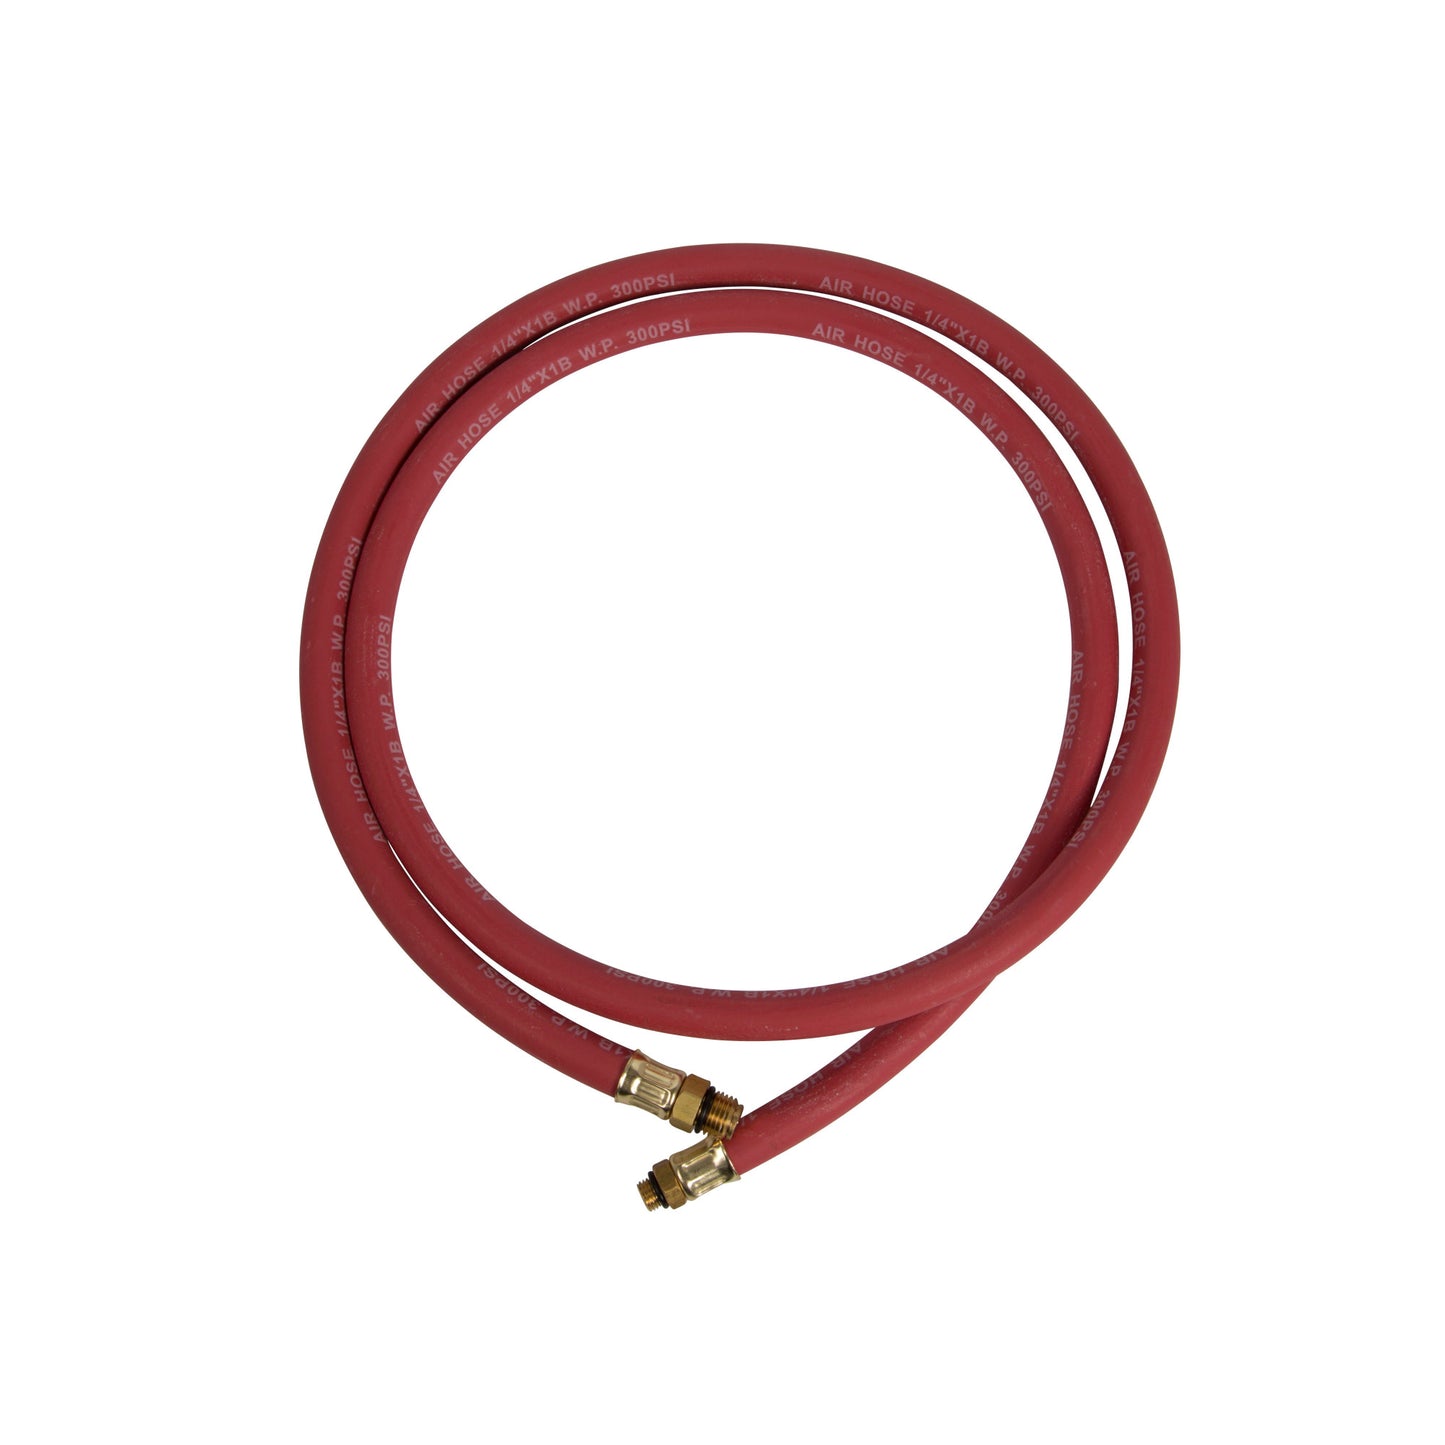 5-Foot Rubber Air Hose with 1/4-Inch NPS and 3/8-Inch -24 Brass Fittings